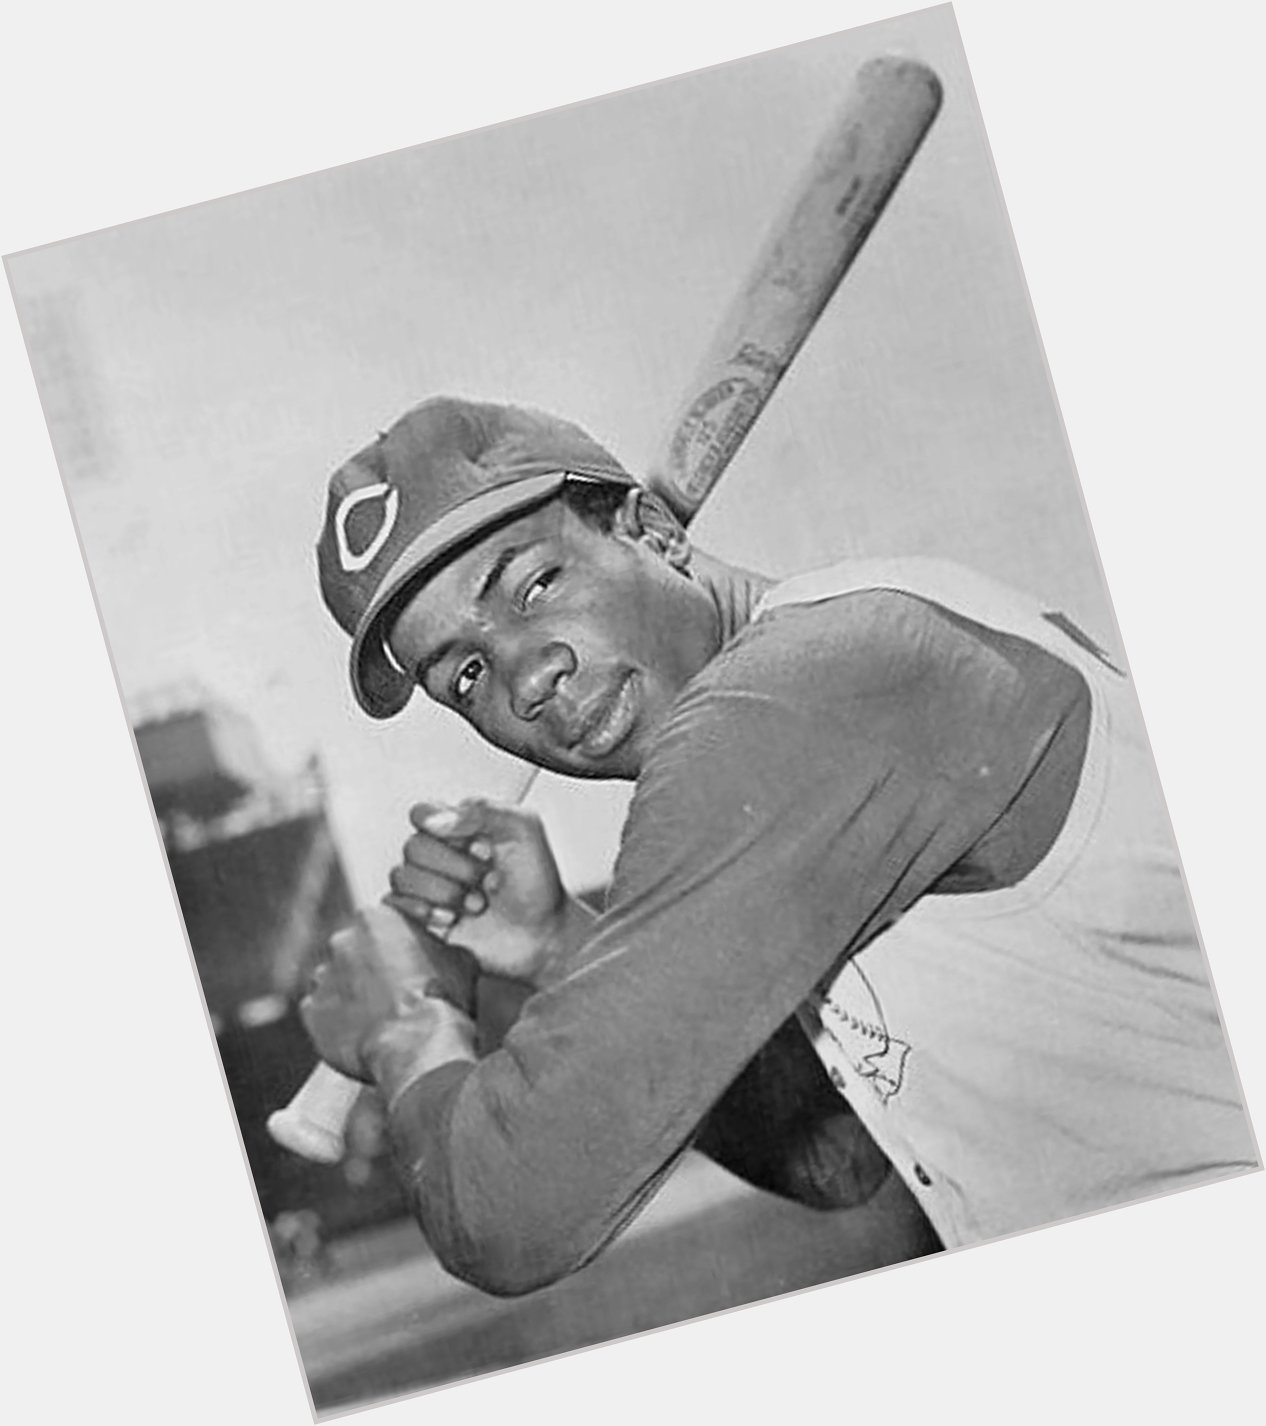 Happy heavenly birthday to Hall of Famer Frank Robinson. Born on this date in 1935.  